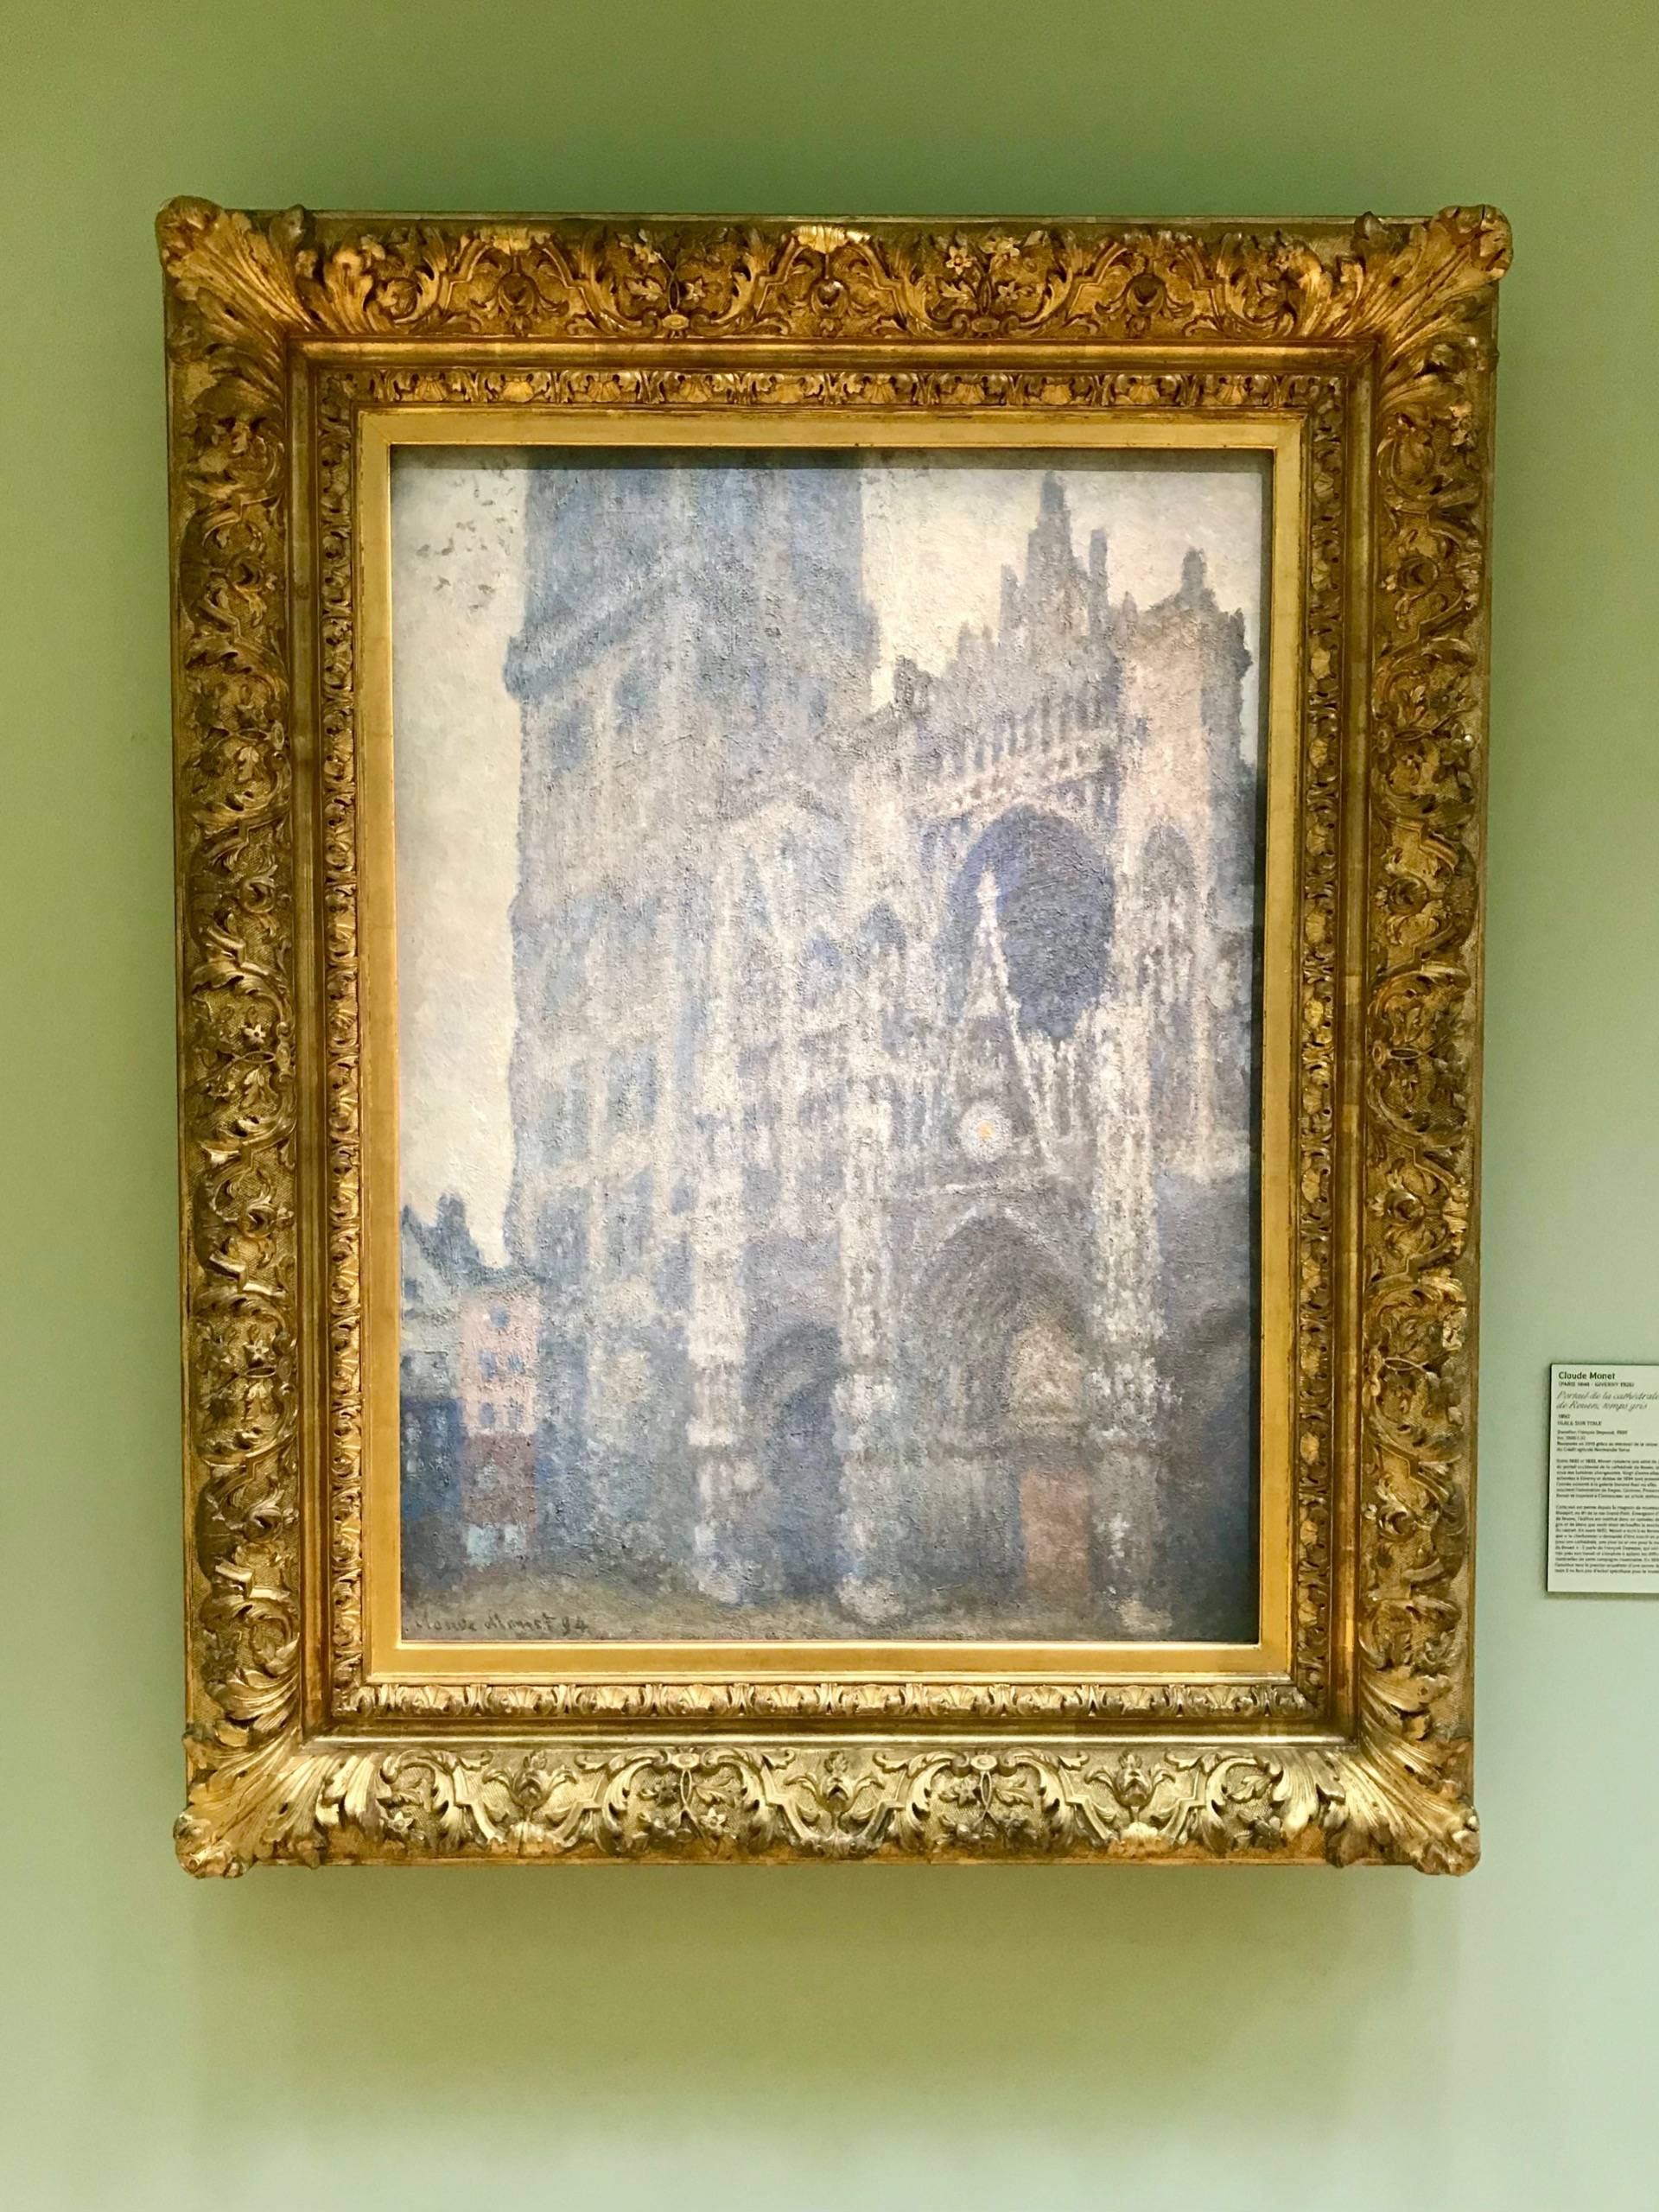 Monet's Muse: Rouen Cathedral